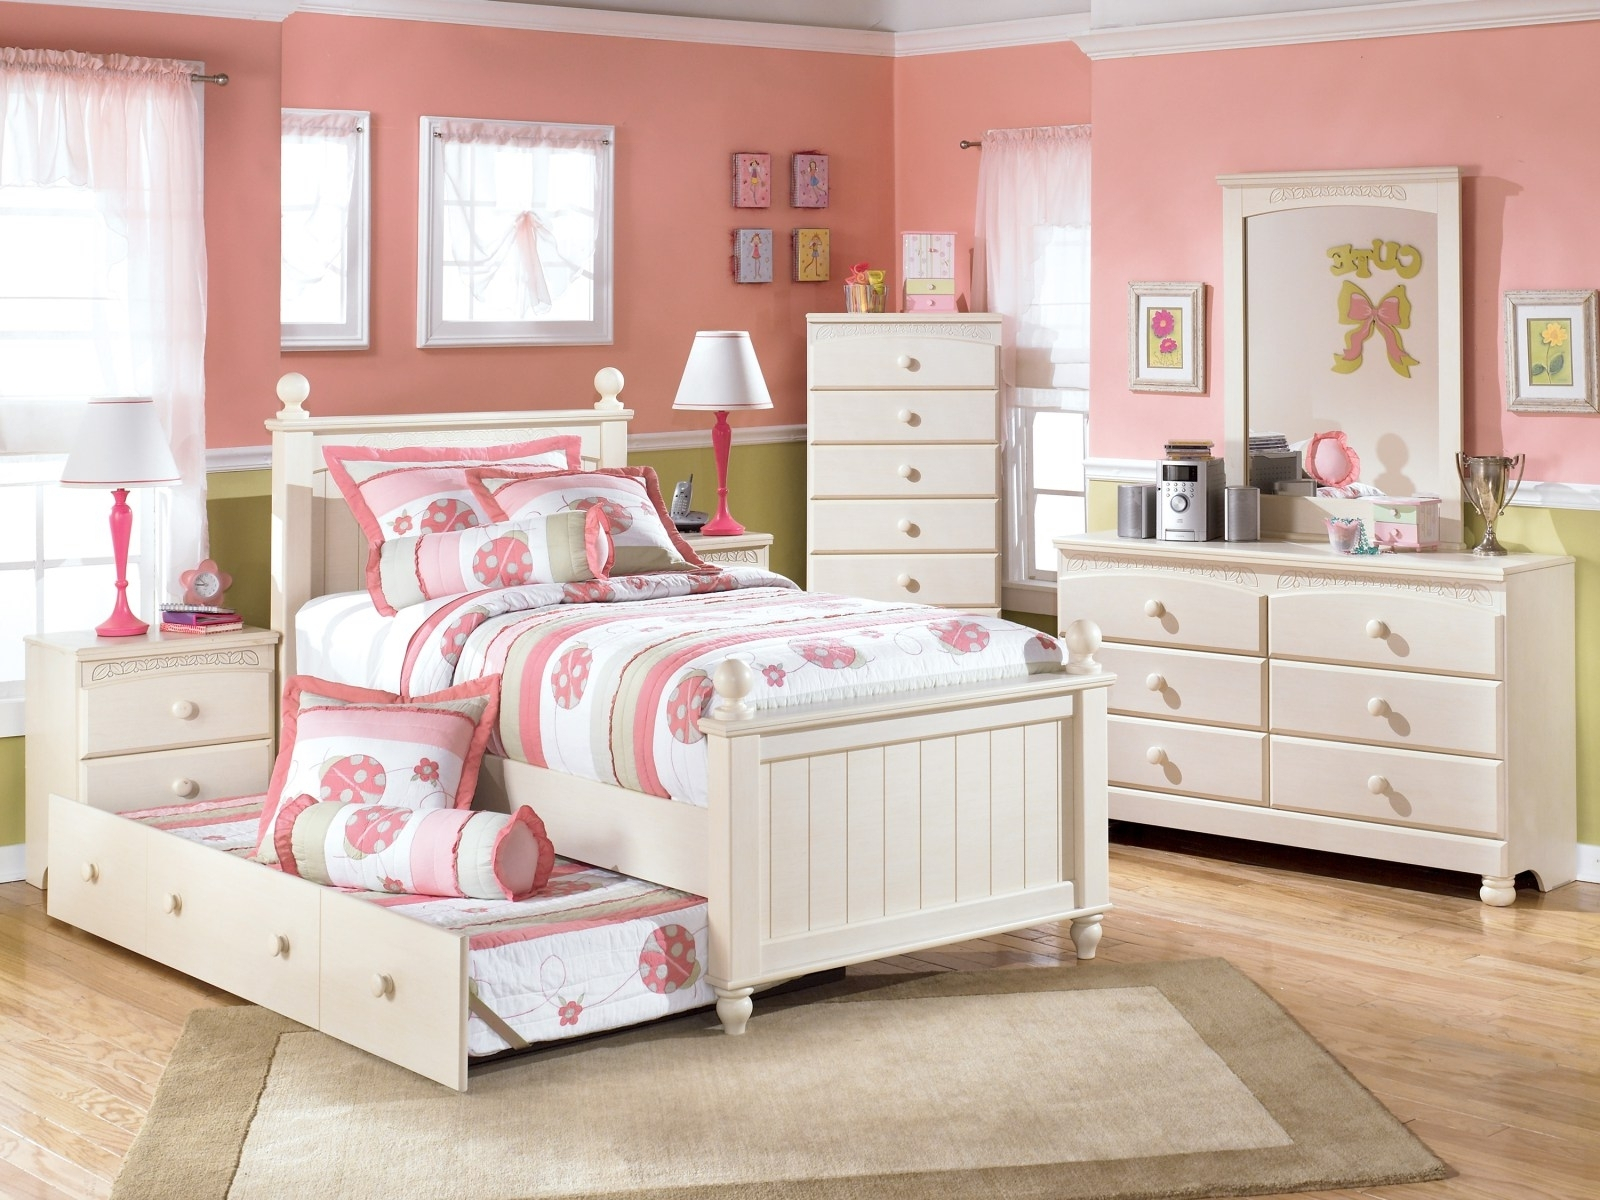 Girls Bedroom Sets Suitable Combine With Twin Bedroom Sets For Girls pertaining to sizing 1600 X 1200